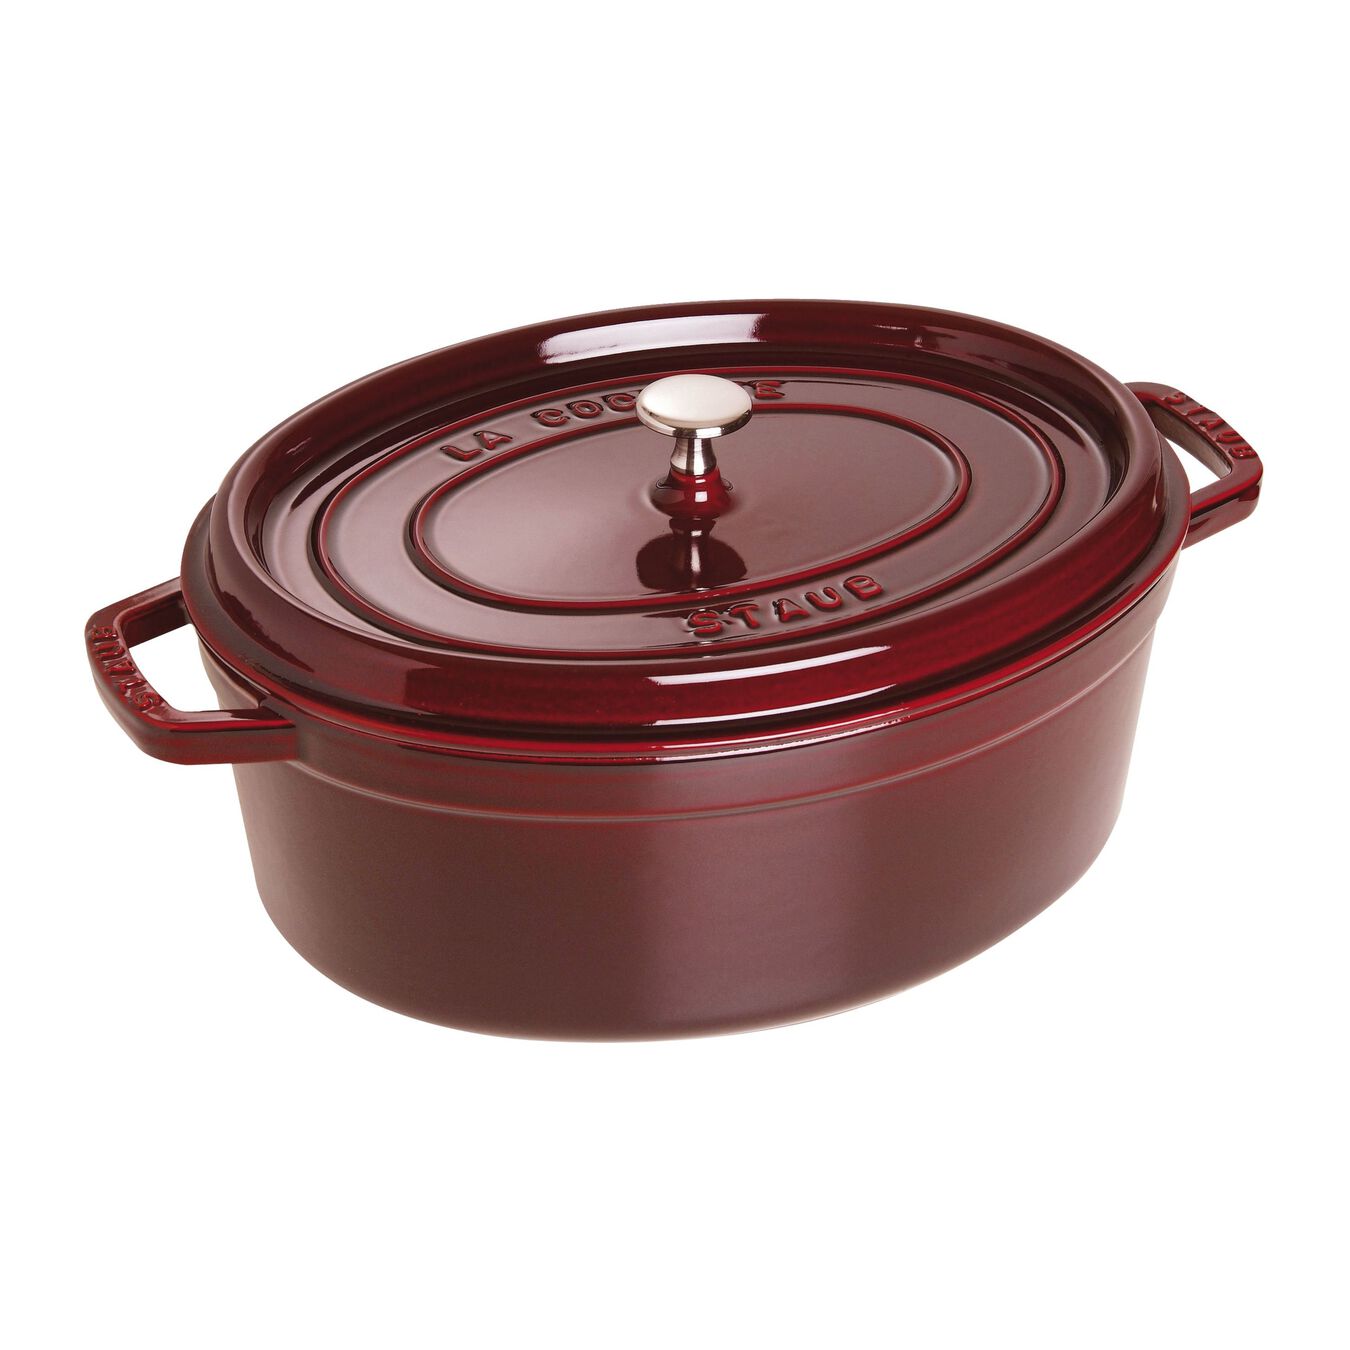 Cocotte 31 cm, oval, Grenadine-Rot, Gusseisen,,large 1